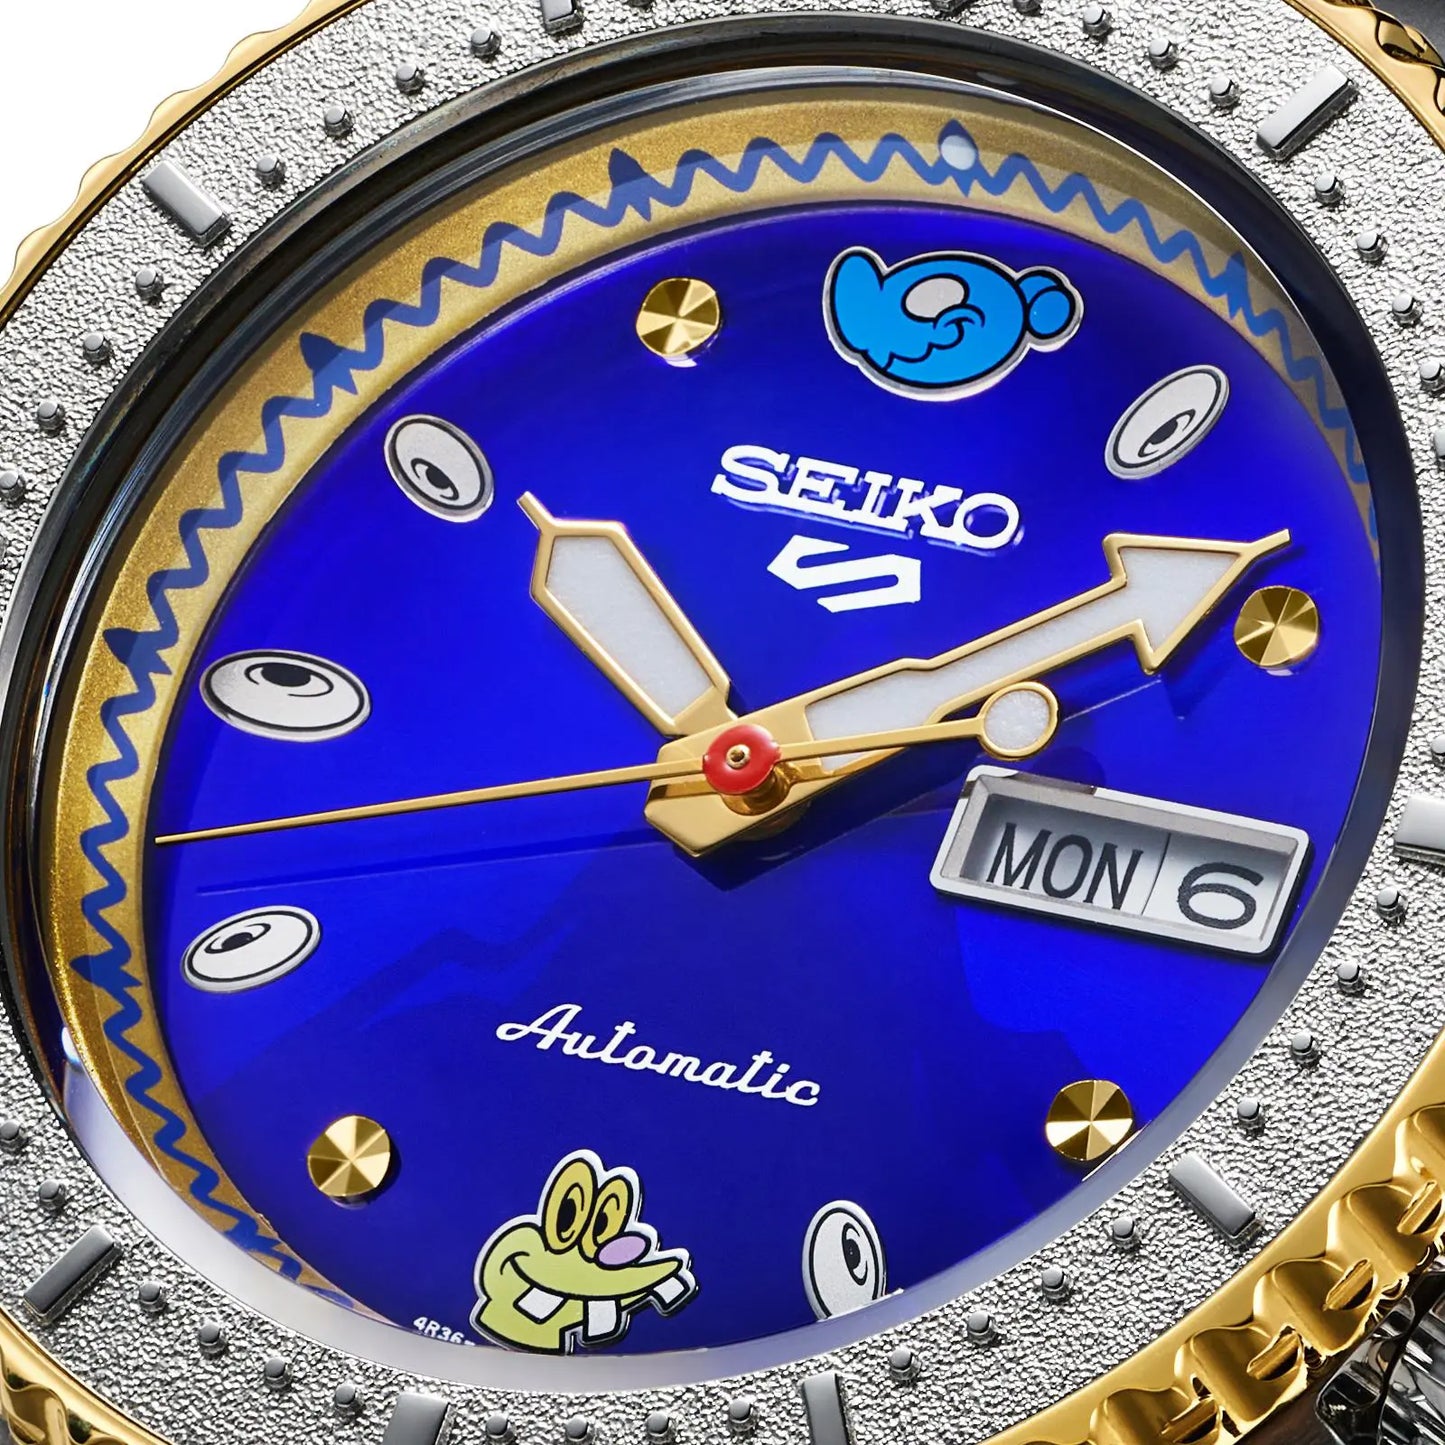 Seiko 5 Sports LE 100M COIN PARKING DELIVERY Men's 2 Tone Gold Plated Watch SRPK02K1